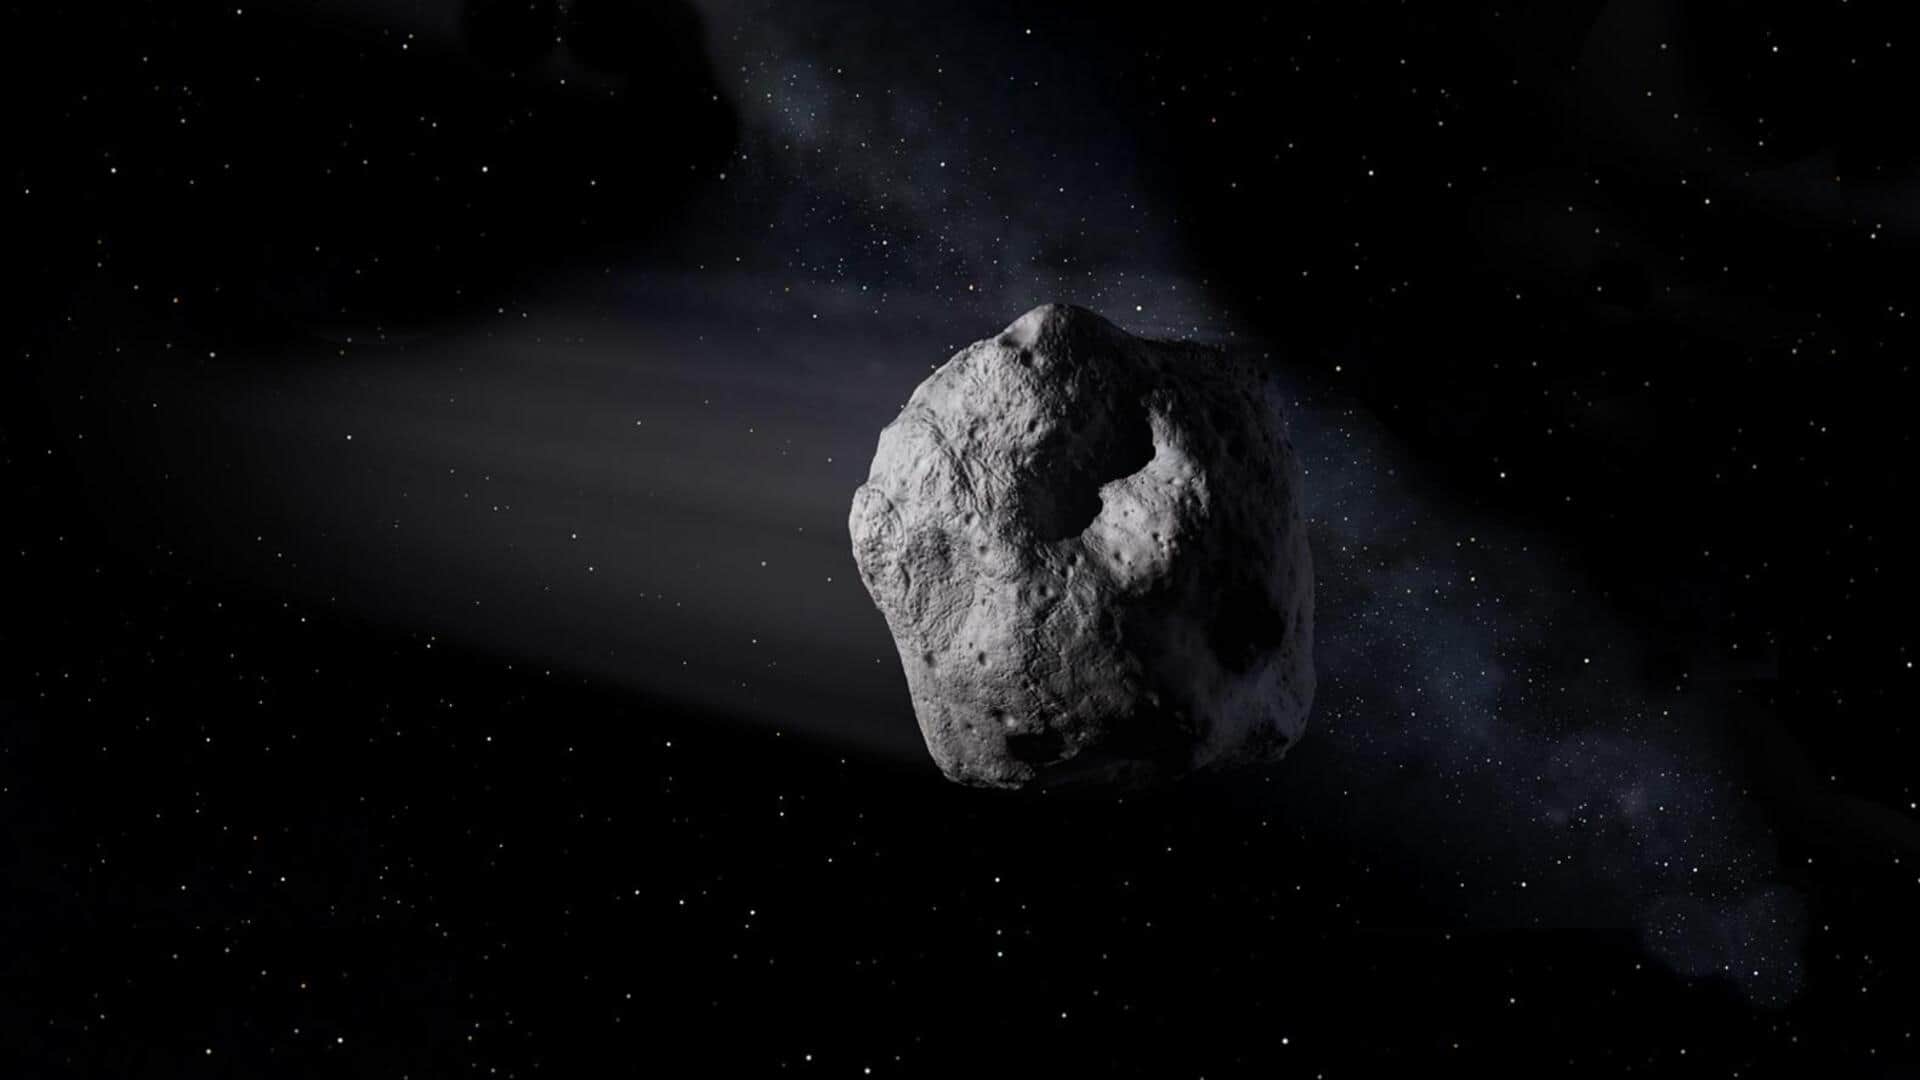 Five asteroids to fly past Earth today, NASA reveals details